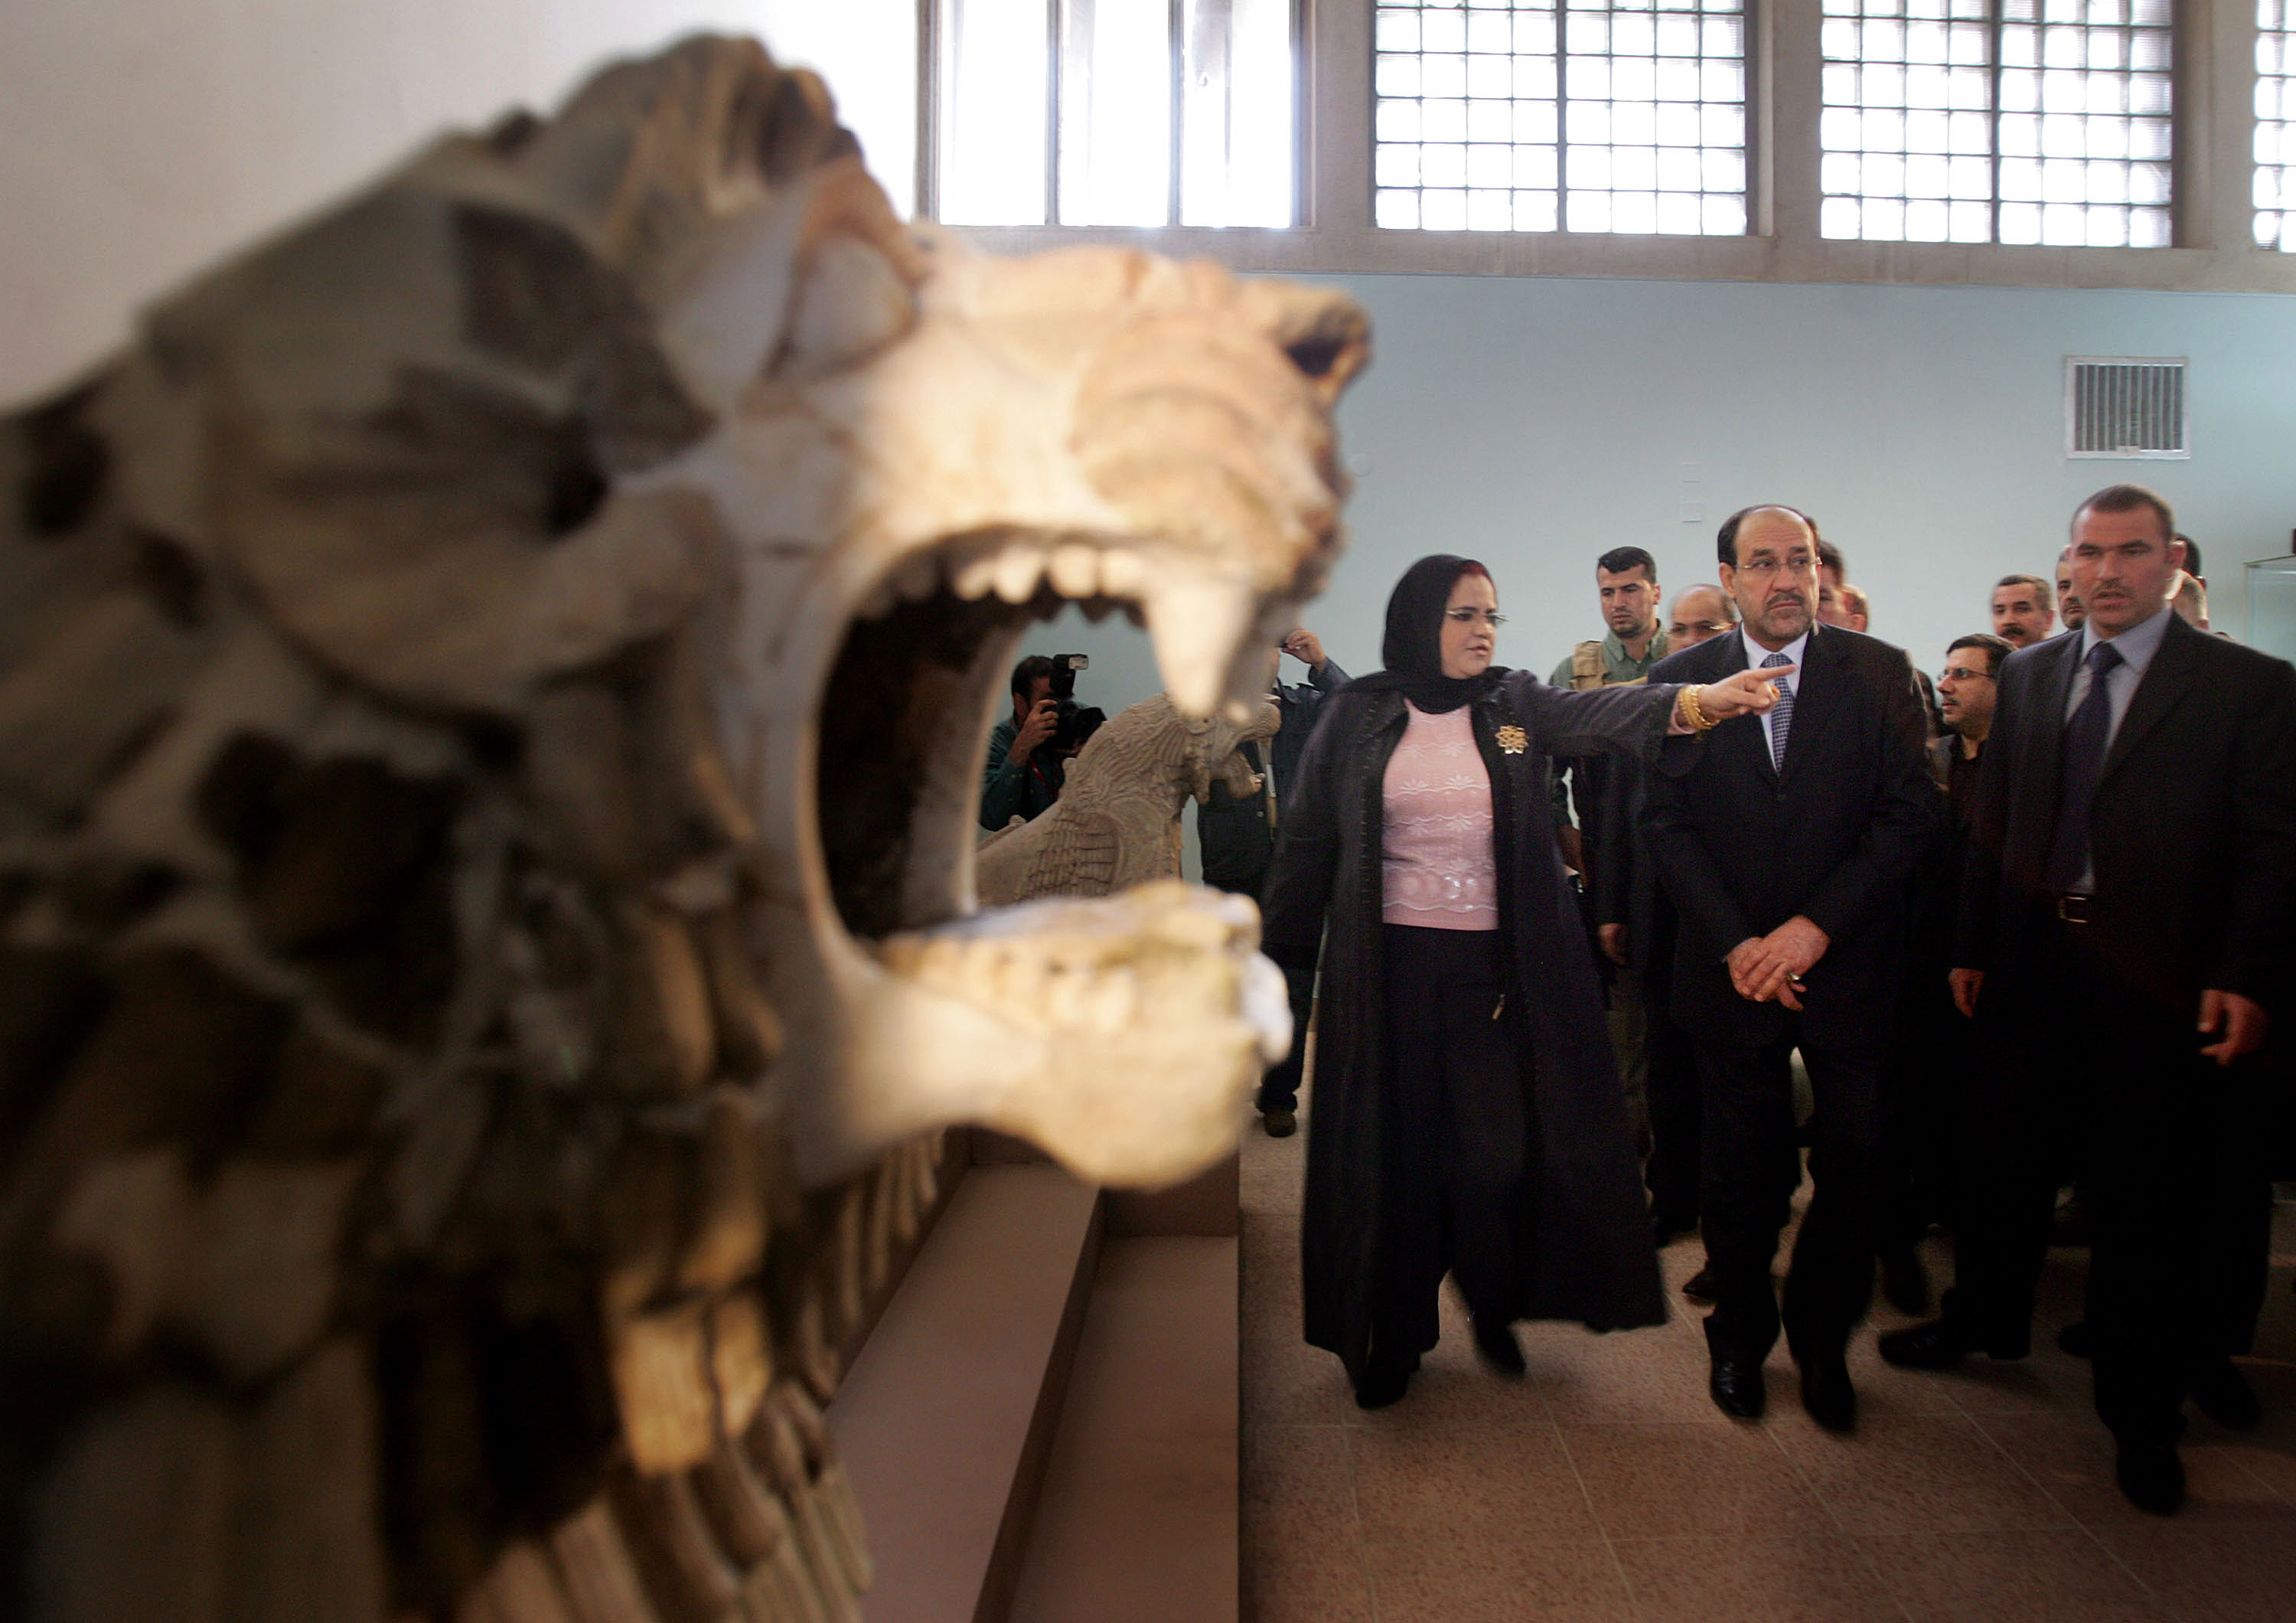 Wathiq Khuzaie/Getty Images. Iraqi National Museum director Amira Eidan (1st L) talks to Iraqi Prime Minister Nuri al-Maliki (2nd L) and other Iraqi officials during a tour at Iraq National Museum on February 23, 2009 in Baghdad, Iraq. The Museum was vandalized and looted during the chaos which followed the 2003 US-led invasion of the country.